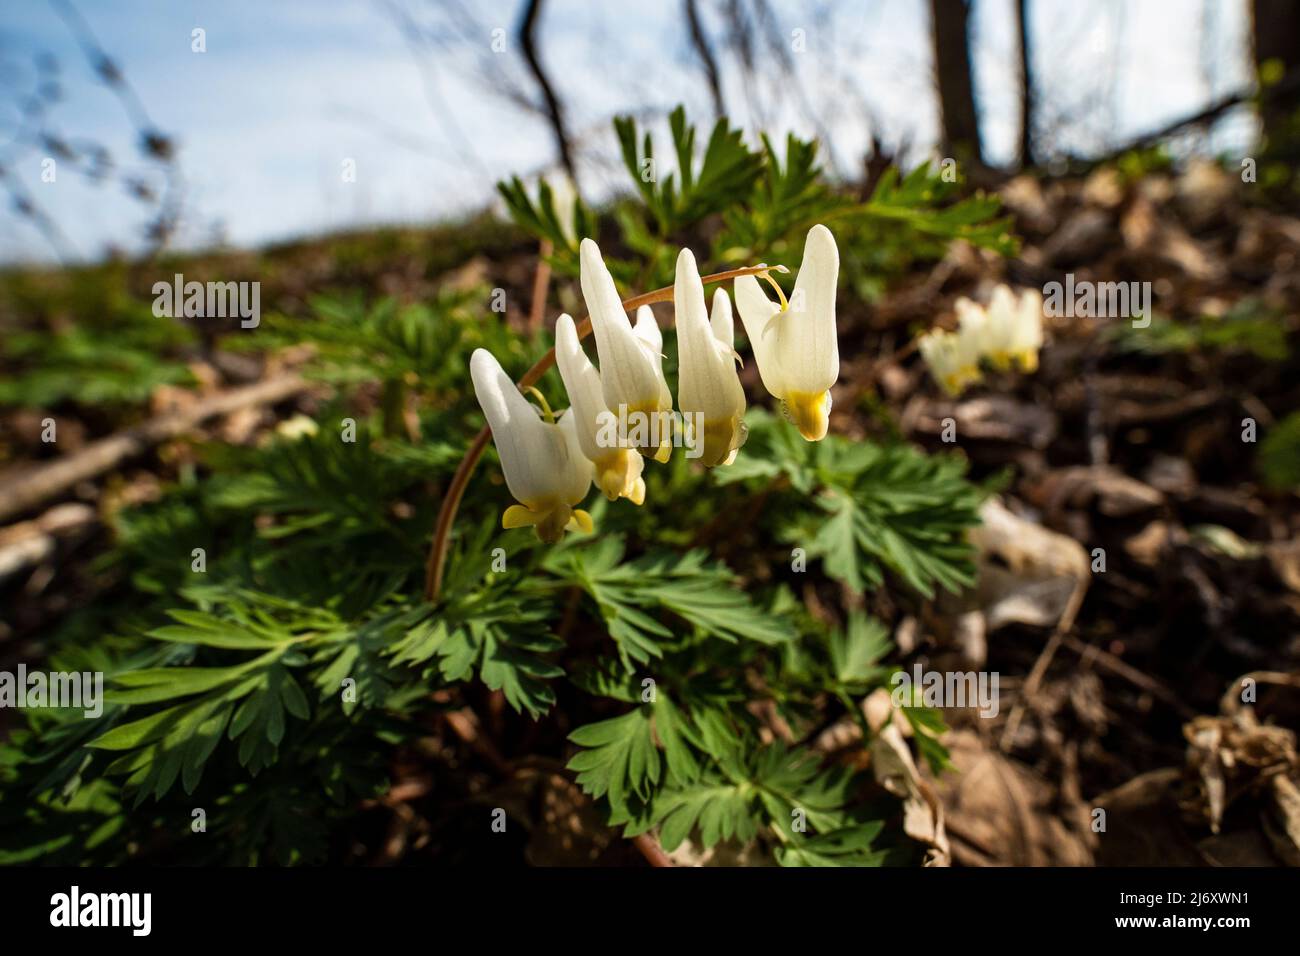 Dutchman's Breeches, Dicentra cucullaria, flowering in a forest in central Michigan, USA Stock Photo